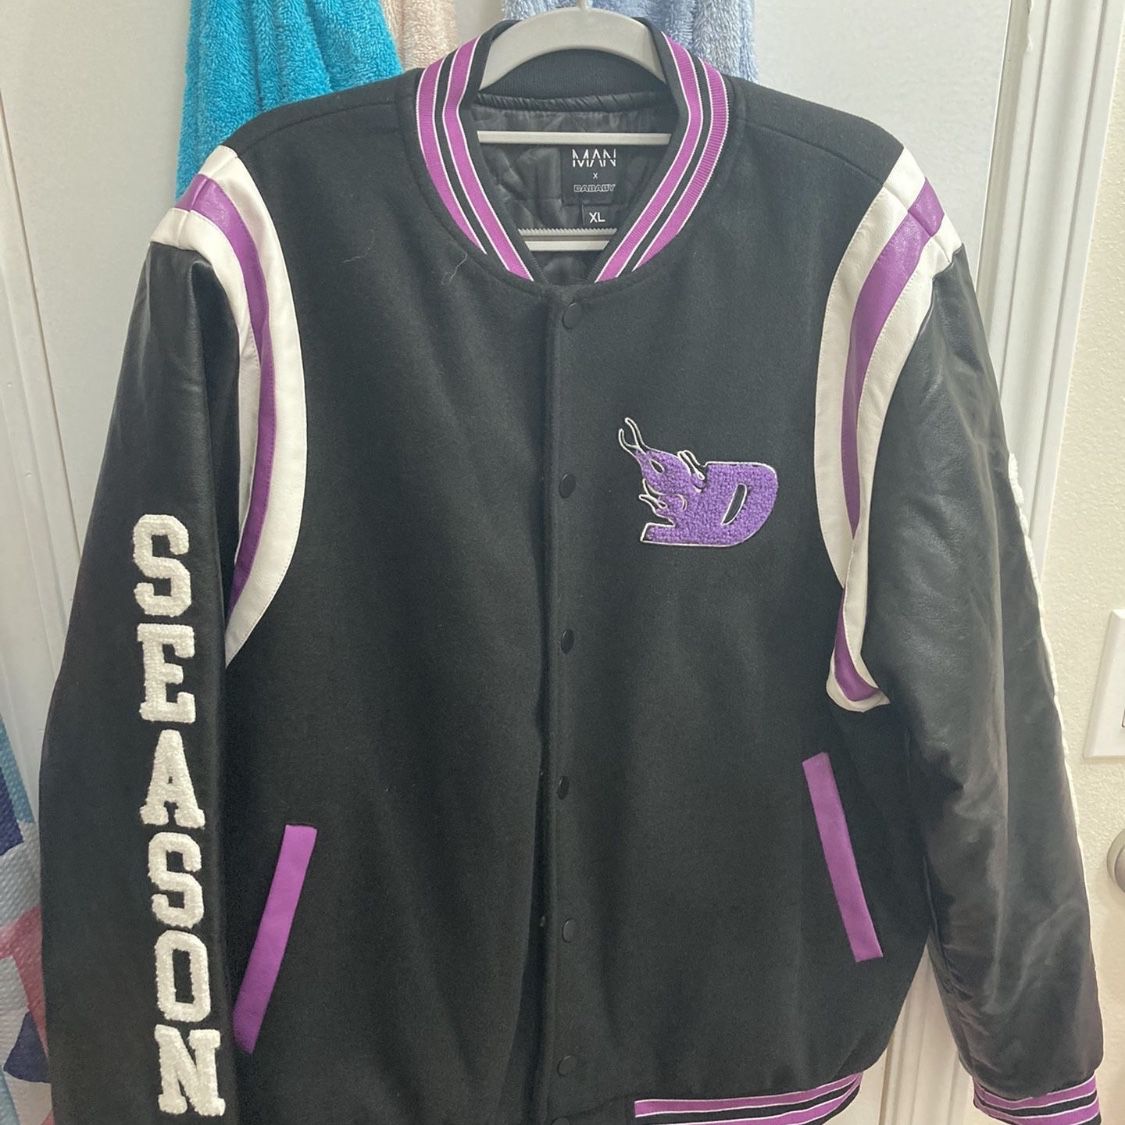 BoohooMAN X Dababy Jacket for Sale in West Covina, CA - OfferUp